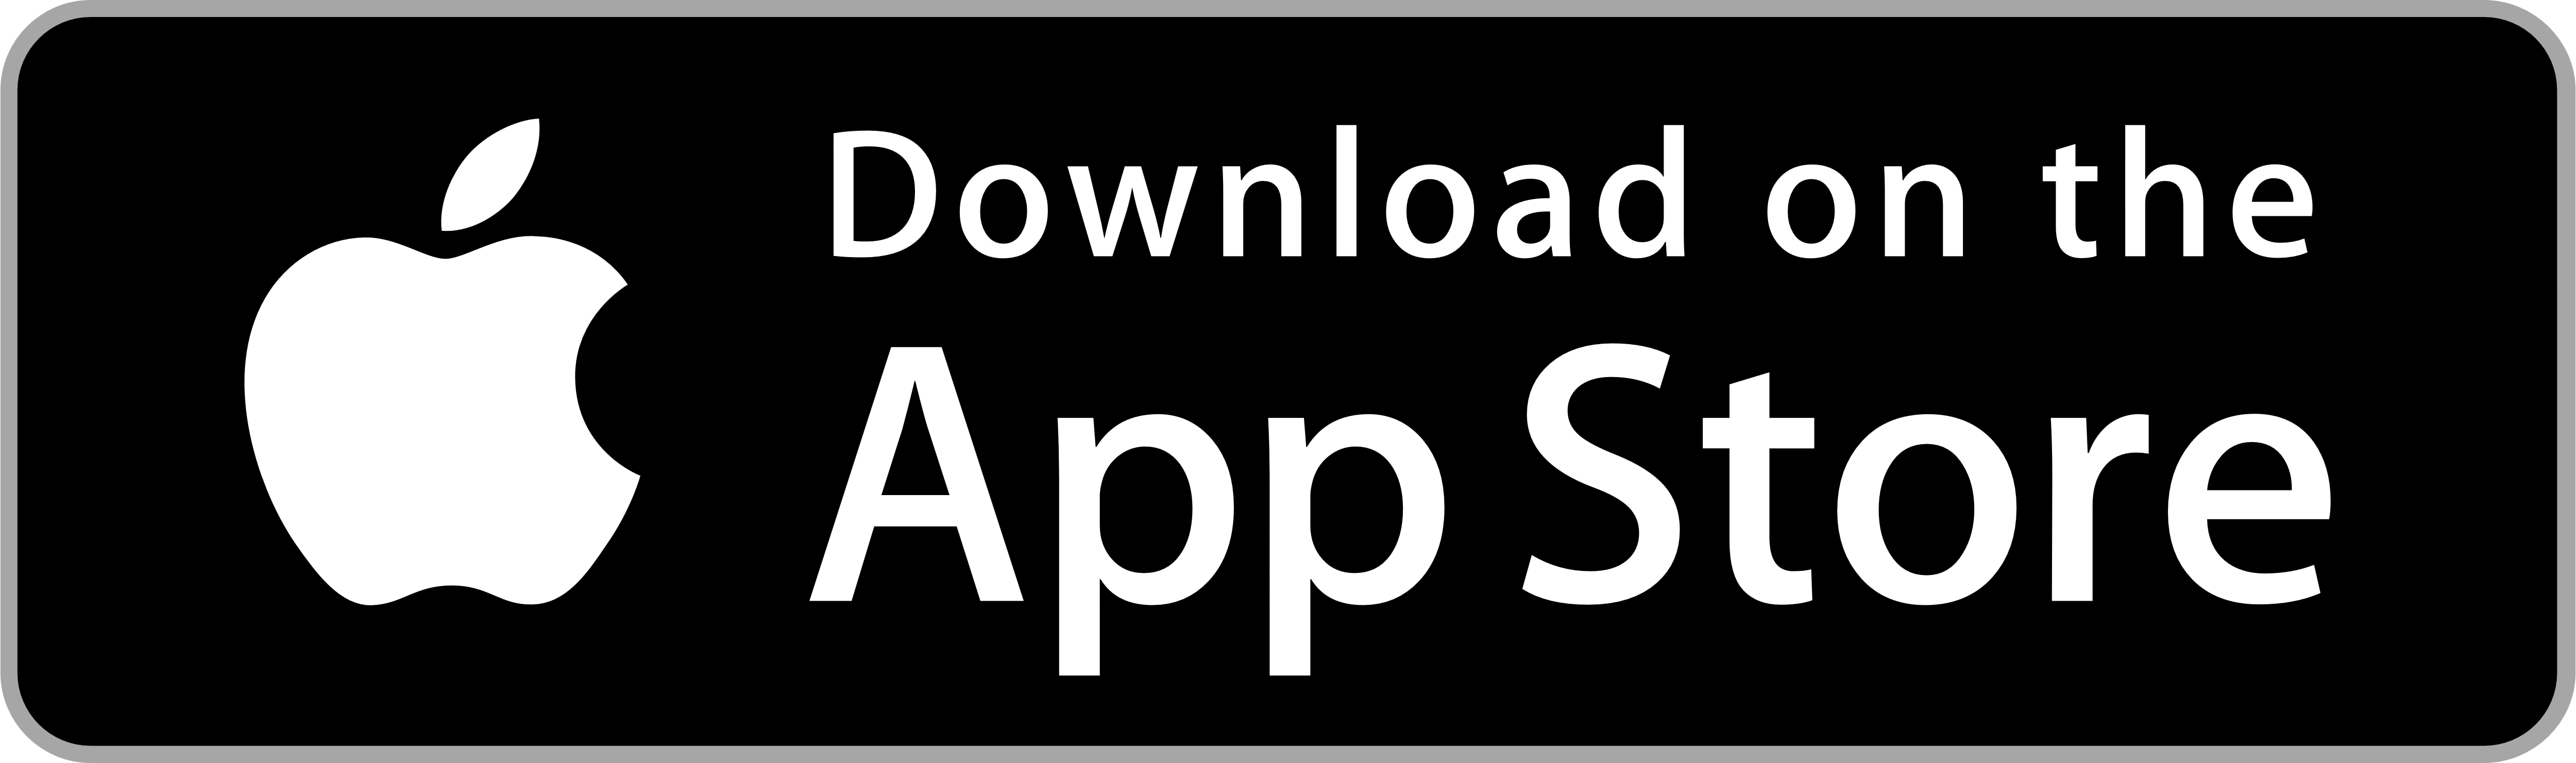 IOS Store Download